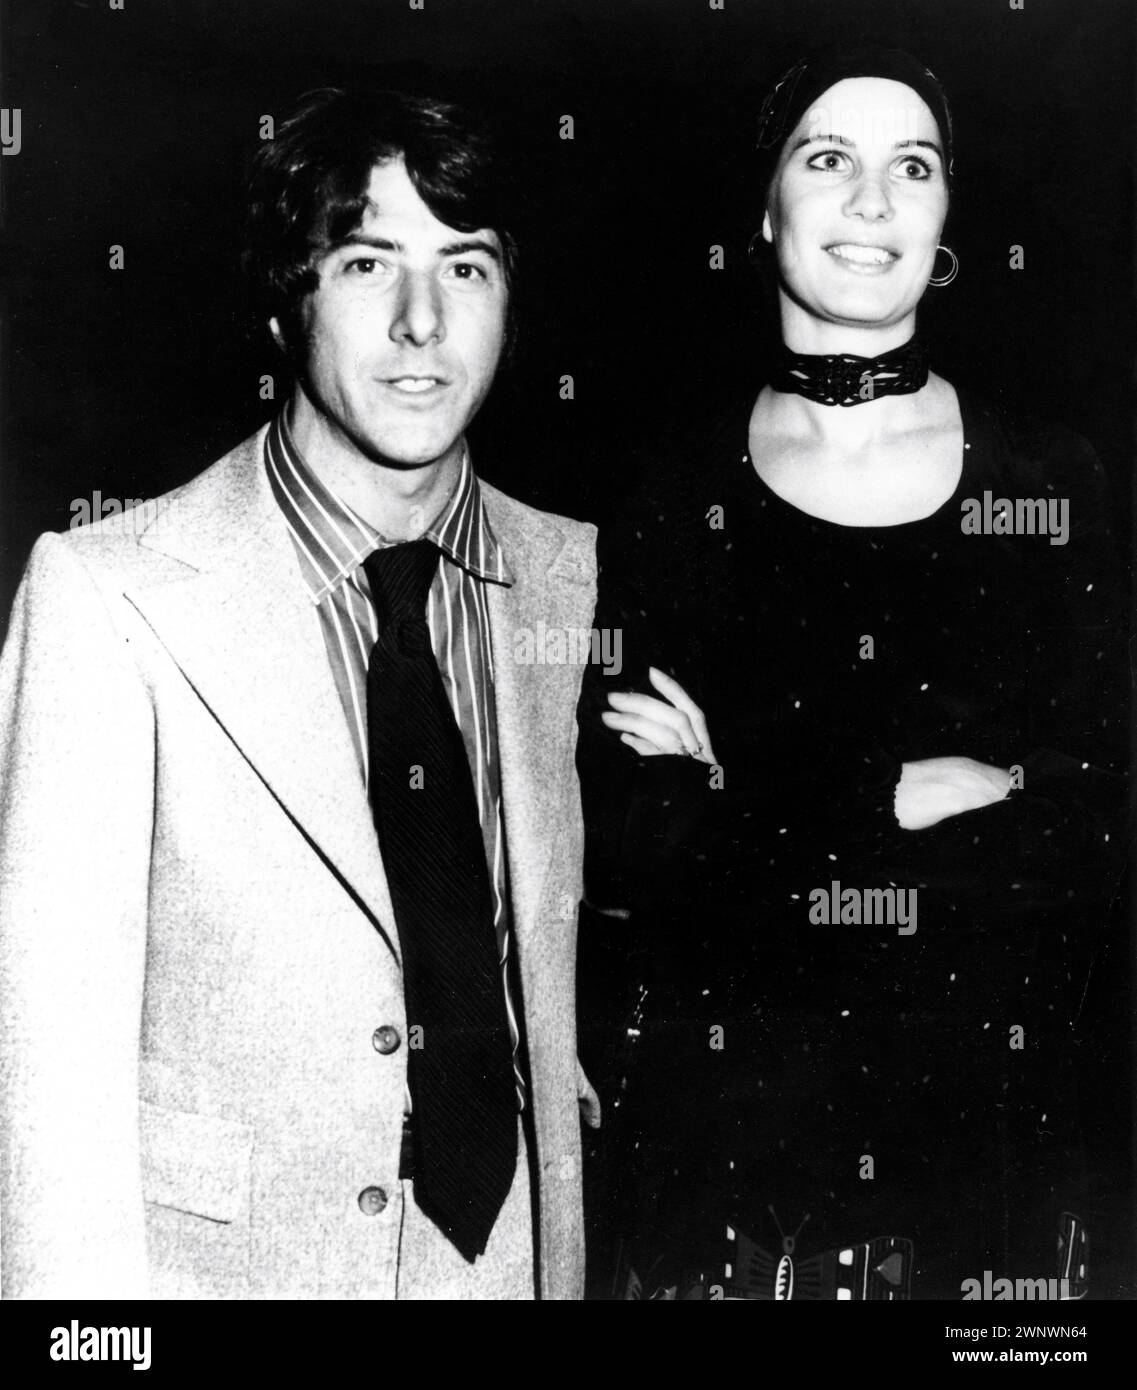 DUSTIN HOFFMAN and his wife ANNE BYRNE HOFFMAN at the world premier in New York at the Sutton Theater on 15th June 1971 of his latest film WHO IS HARRY KELLERMAN AND WHY IS HE SAYING THOSE TERRIBLE THINGS ABOUT ME ? 1971 director ULU GROSBARD short story / screenplay Herb Gardner Cinema Center Films Stock Photo